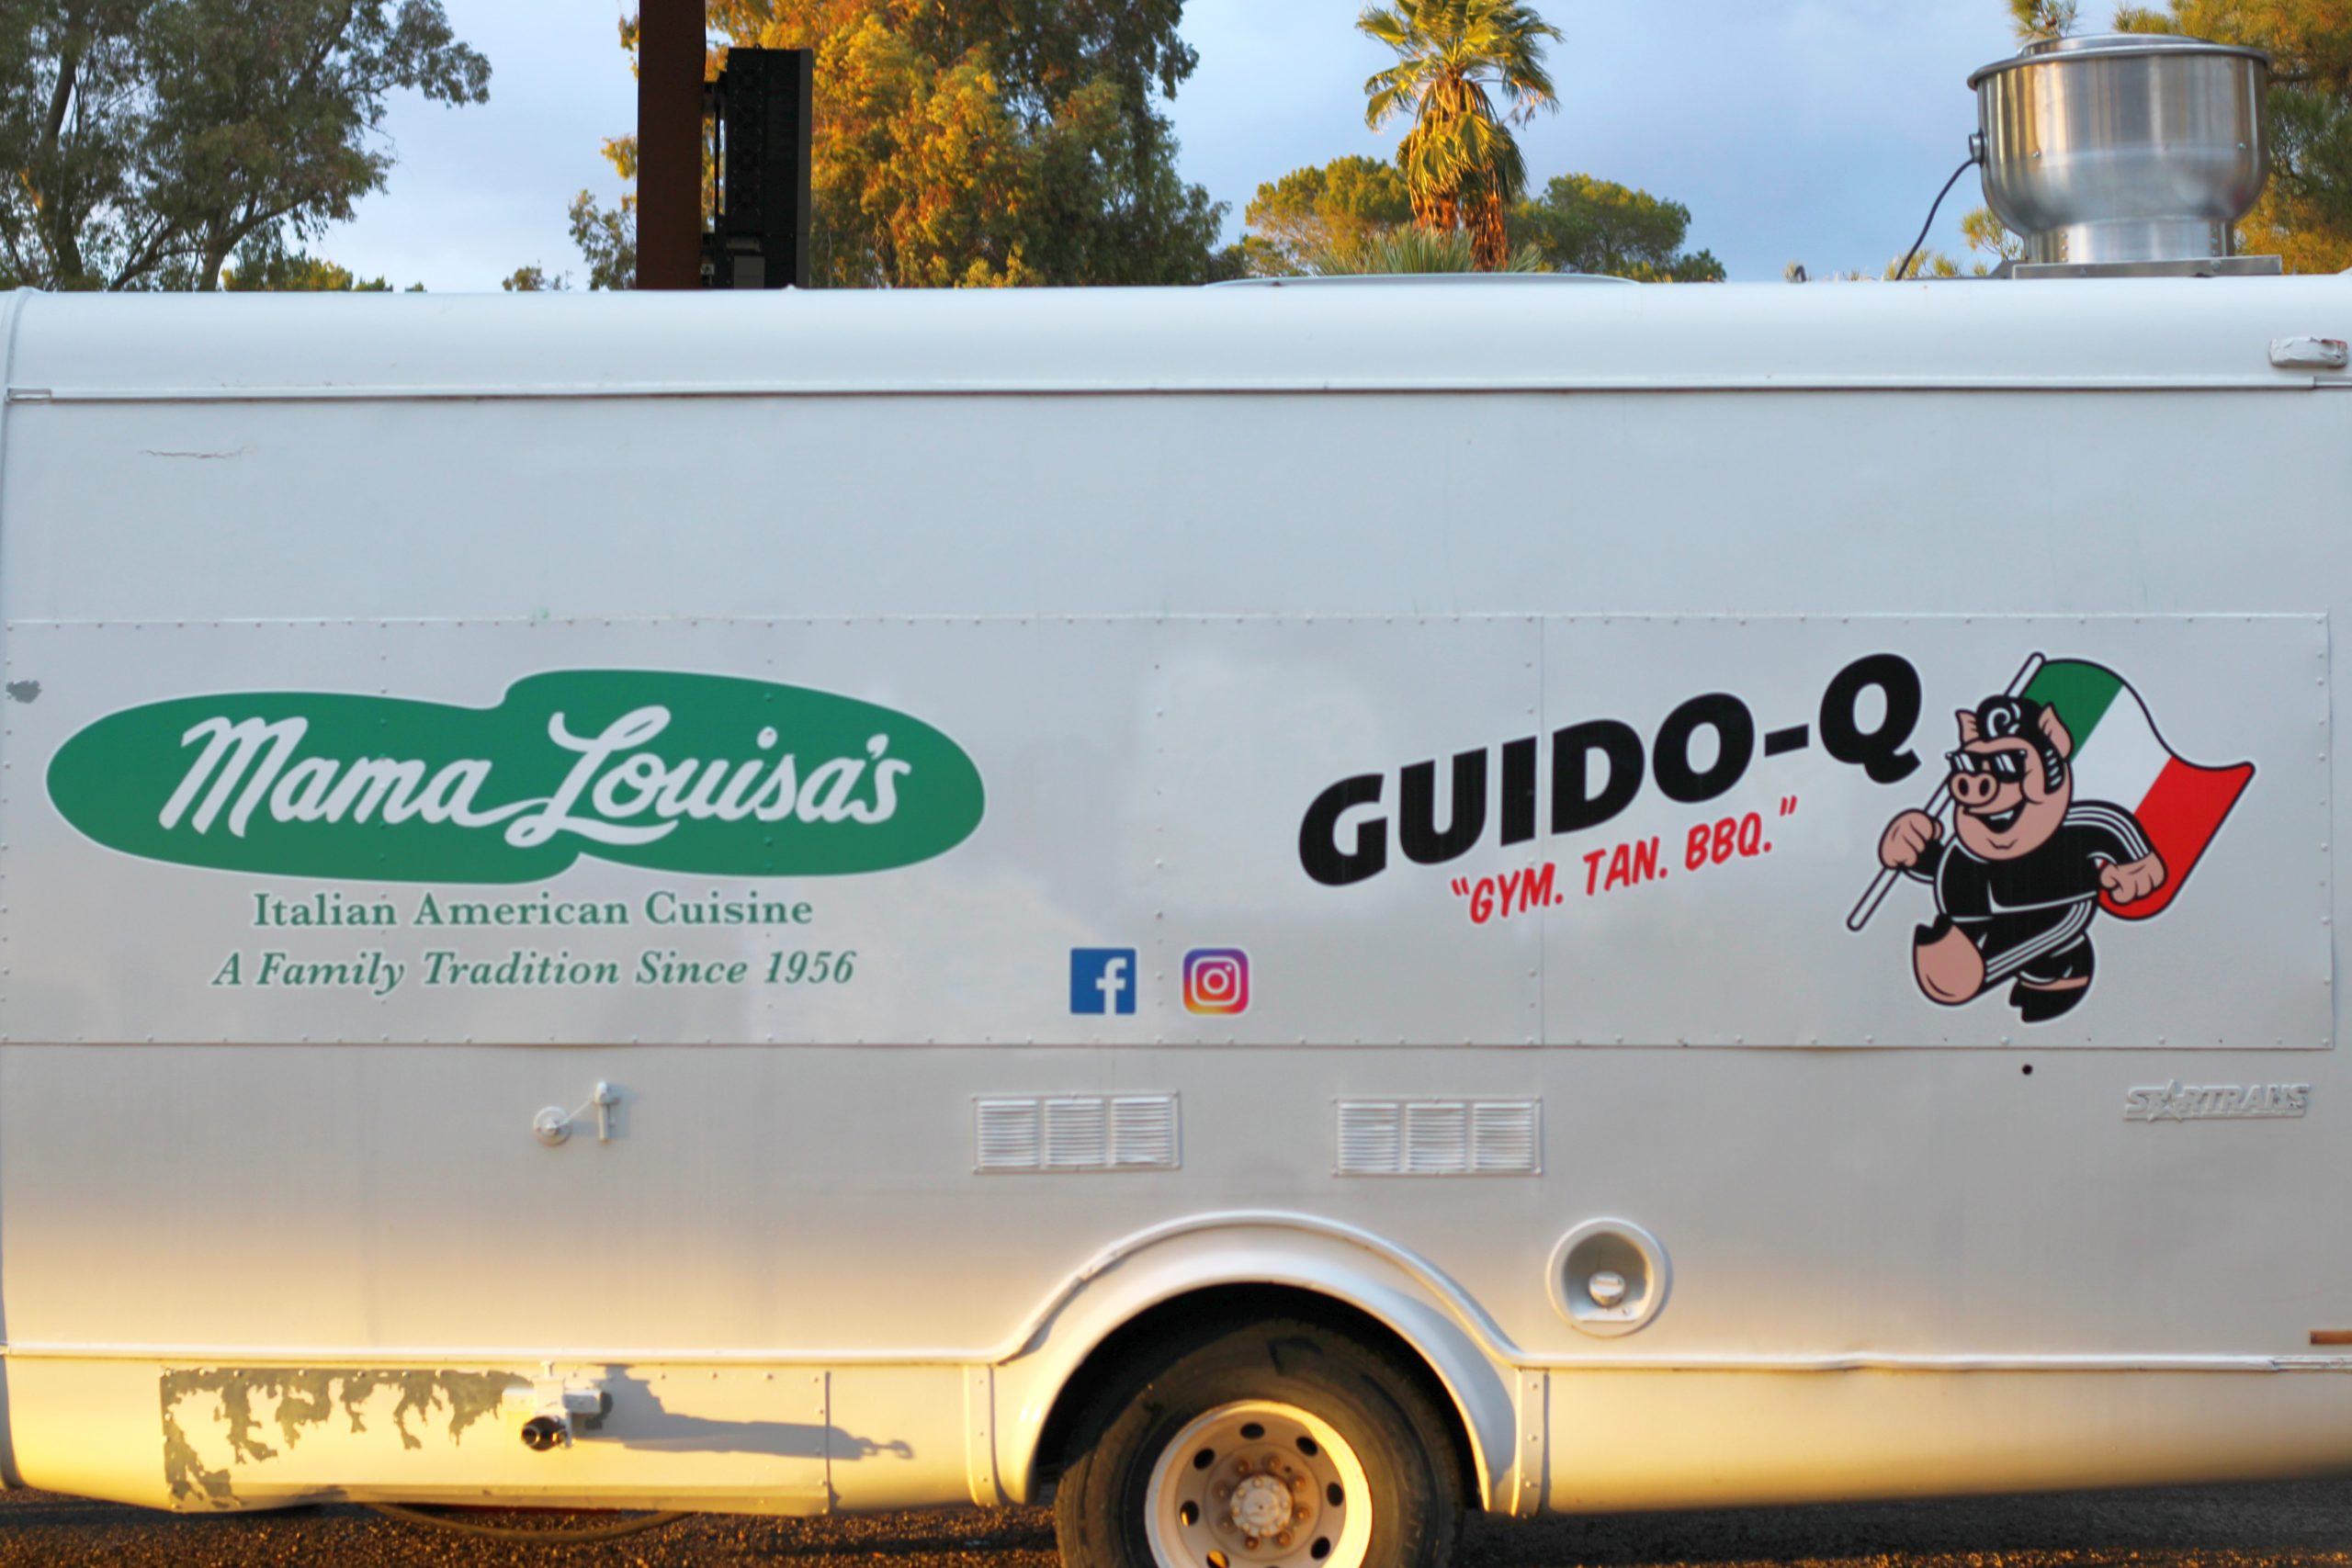 Guido-Q (Photo by Mark Whittaker)